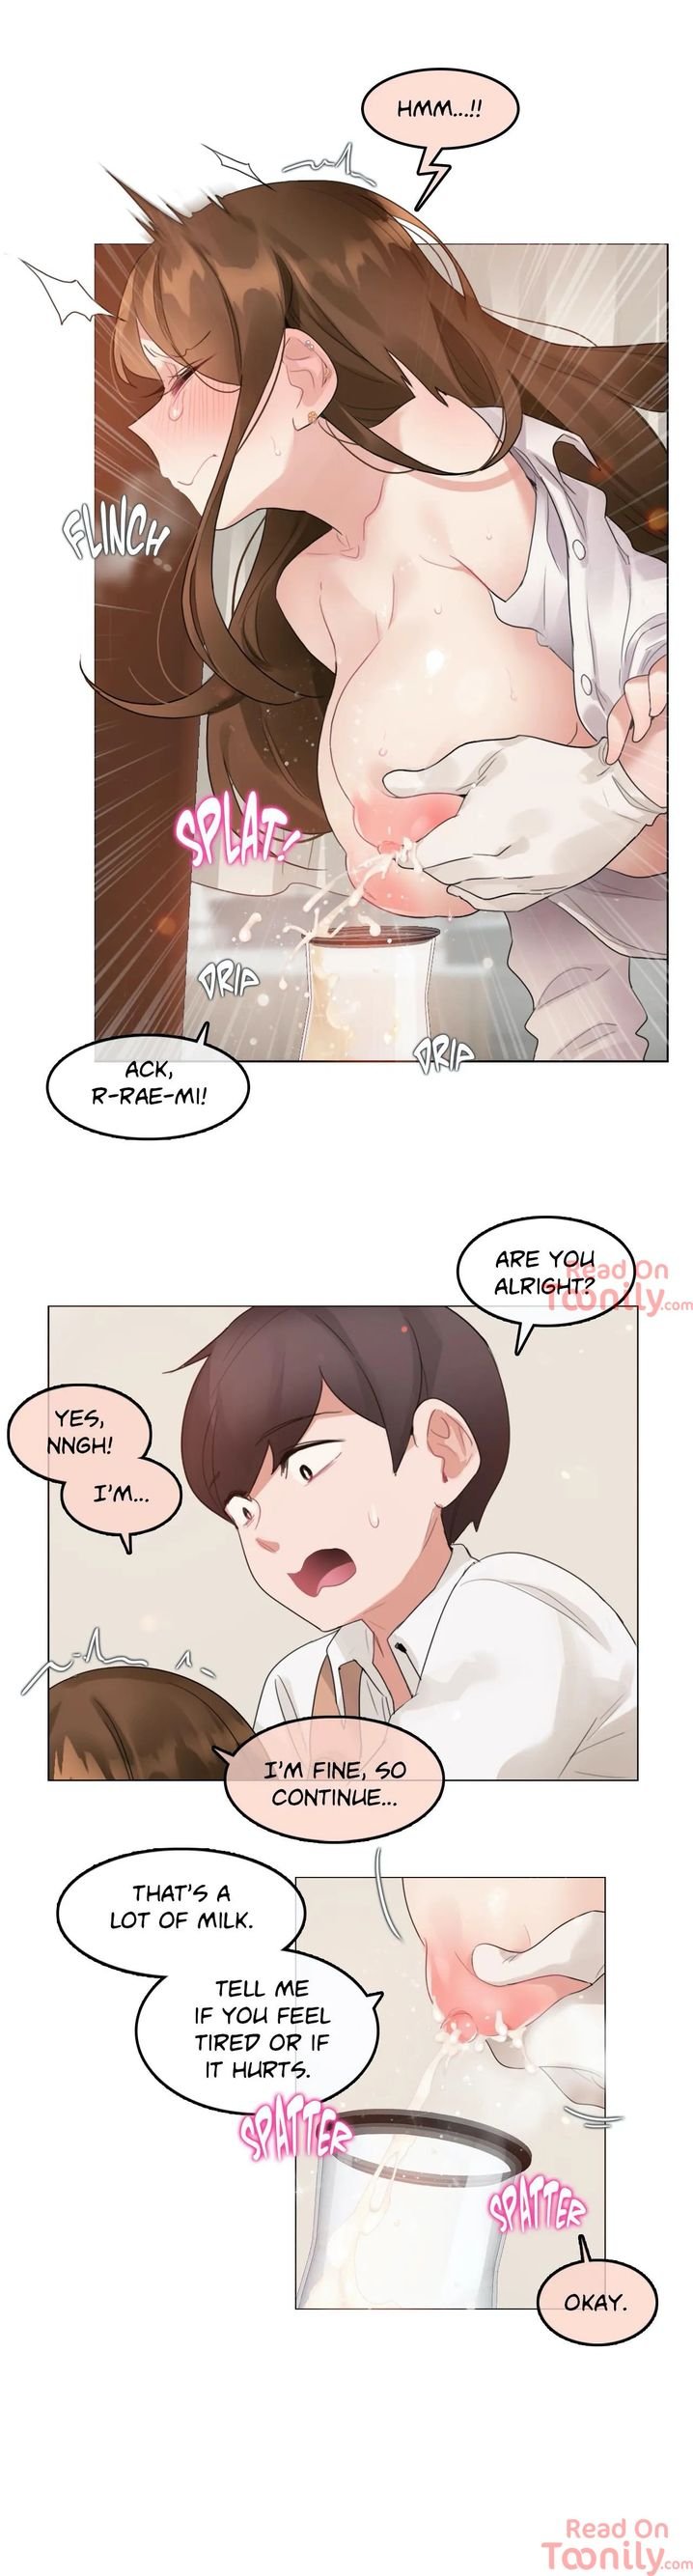 a-perverts-daily-life-chap-77-11